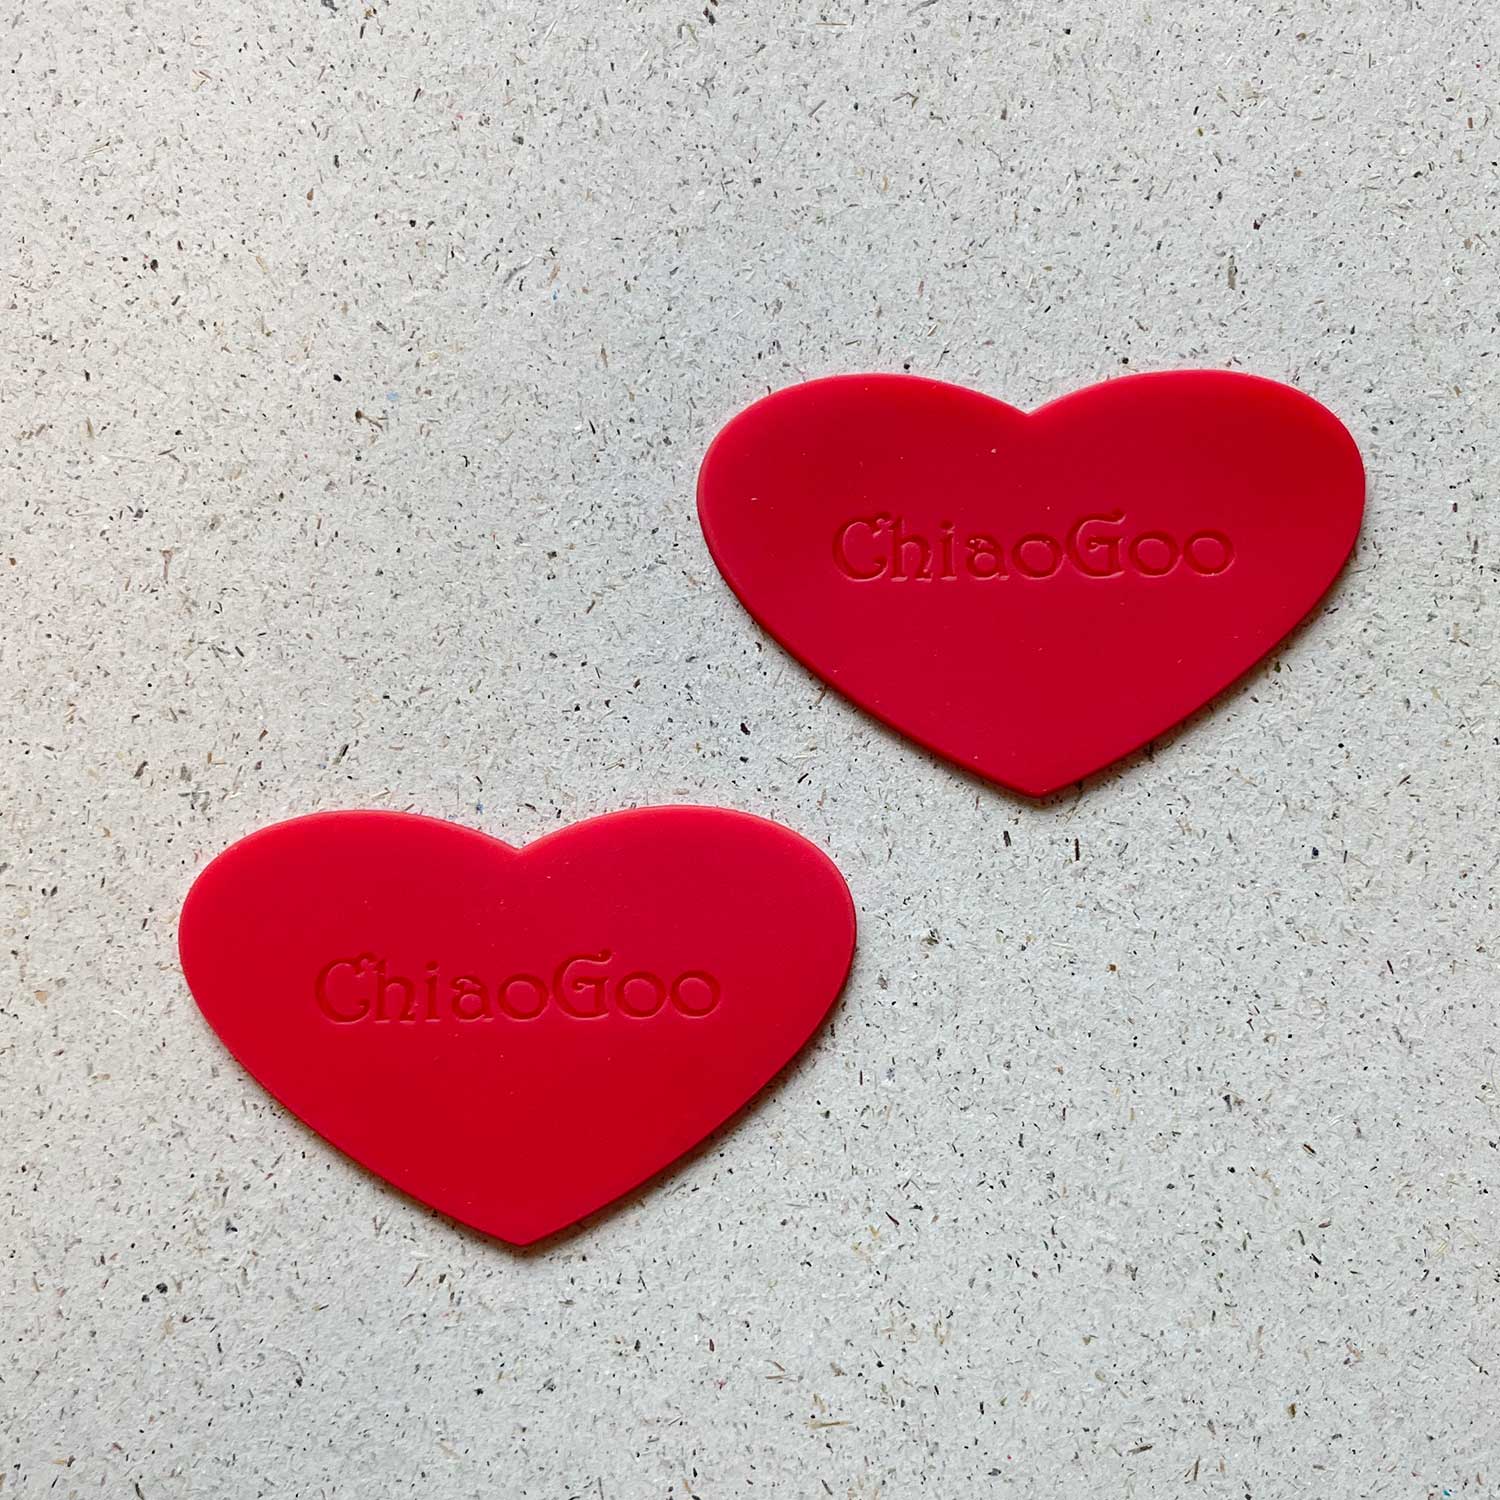 ChiaoGoo Rubber Grippers red rubber hearts for tightening the needle tips